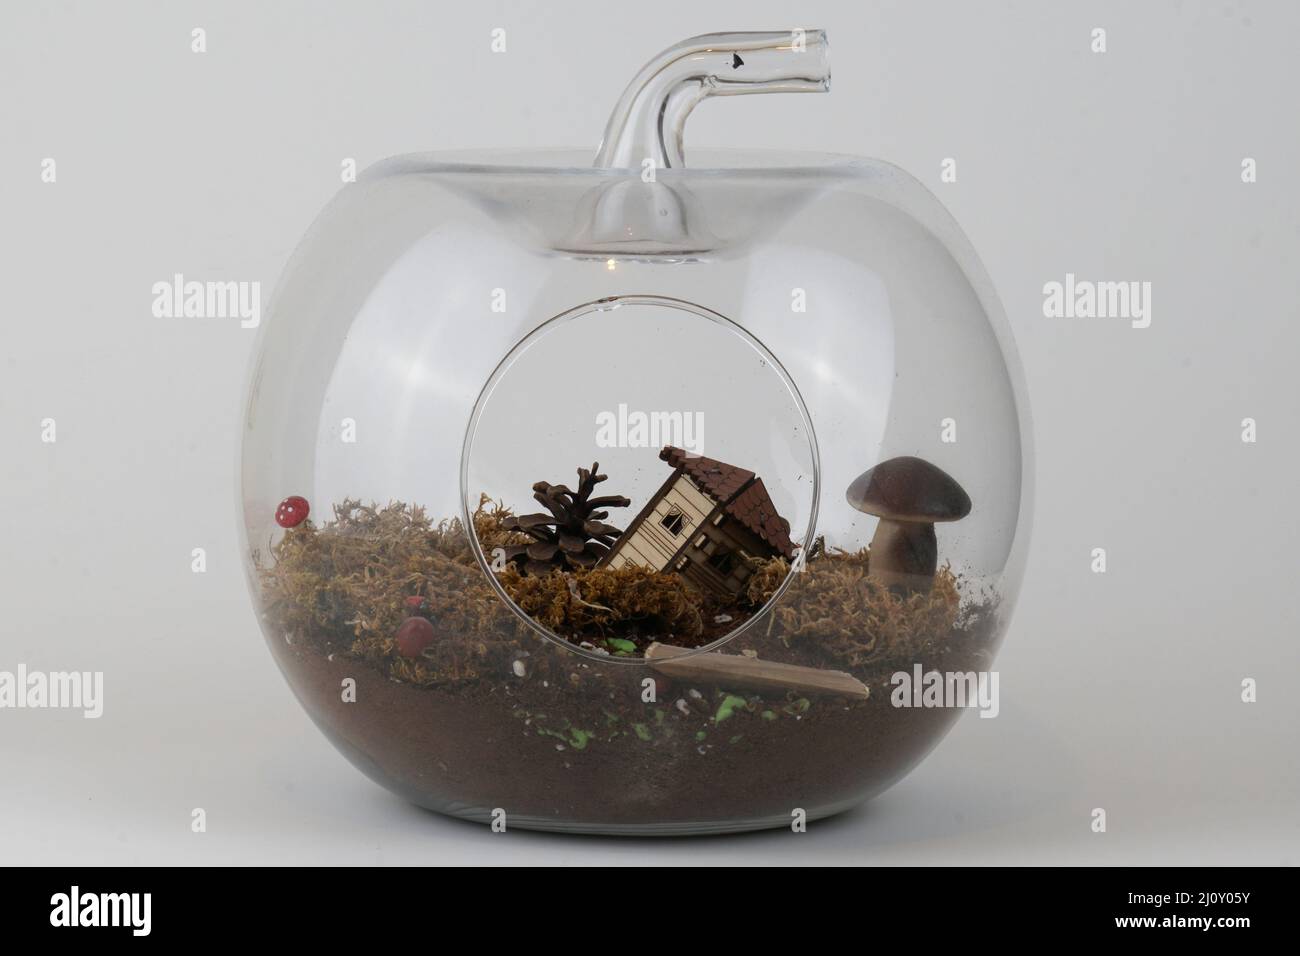 Cropped view of terrarium with tiny house and garden miniatures, taken in isolated area, on white background. Stock Photo